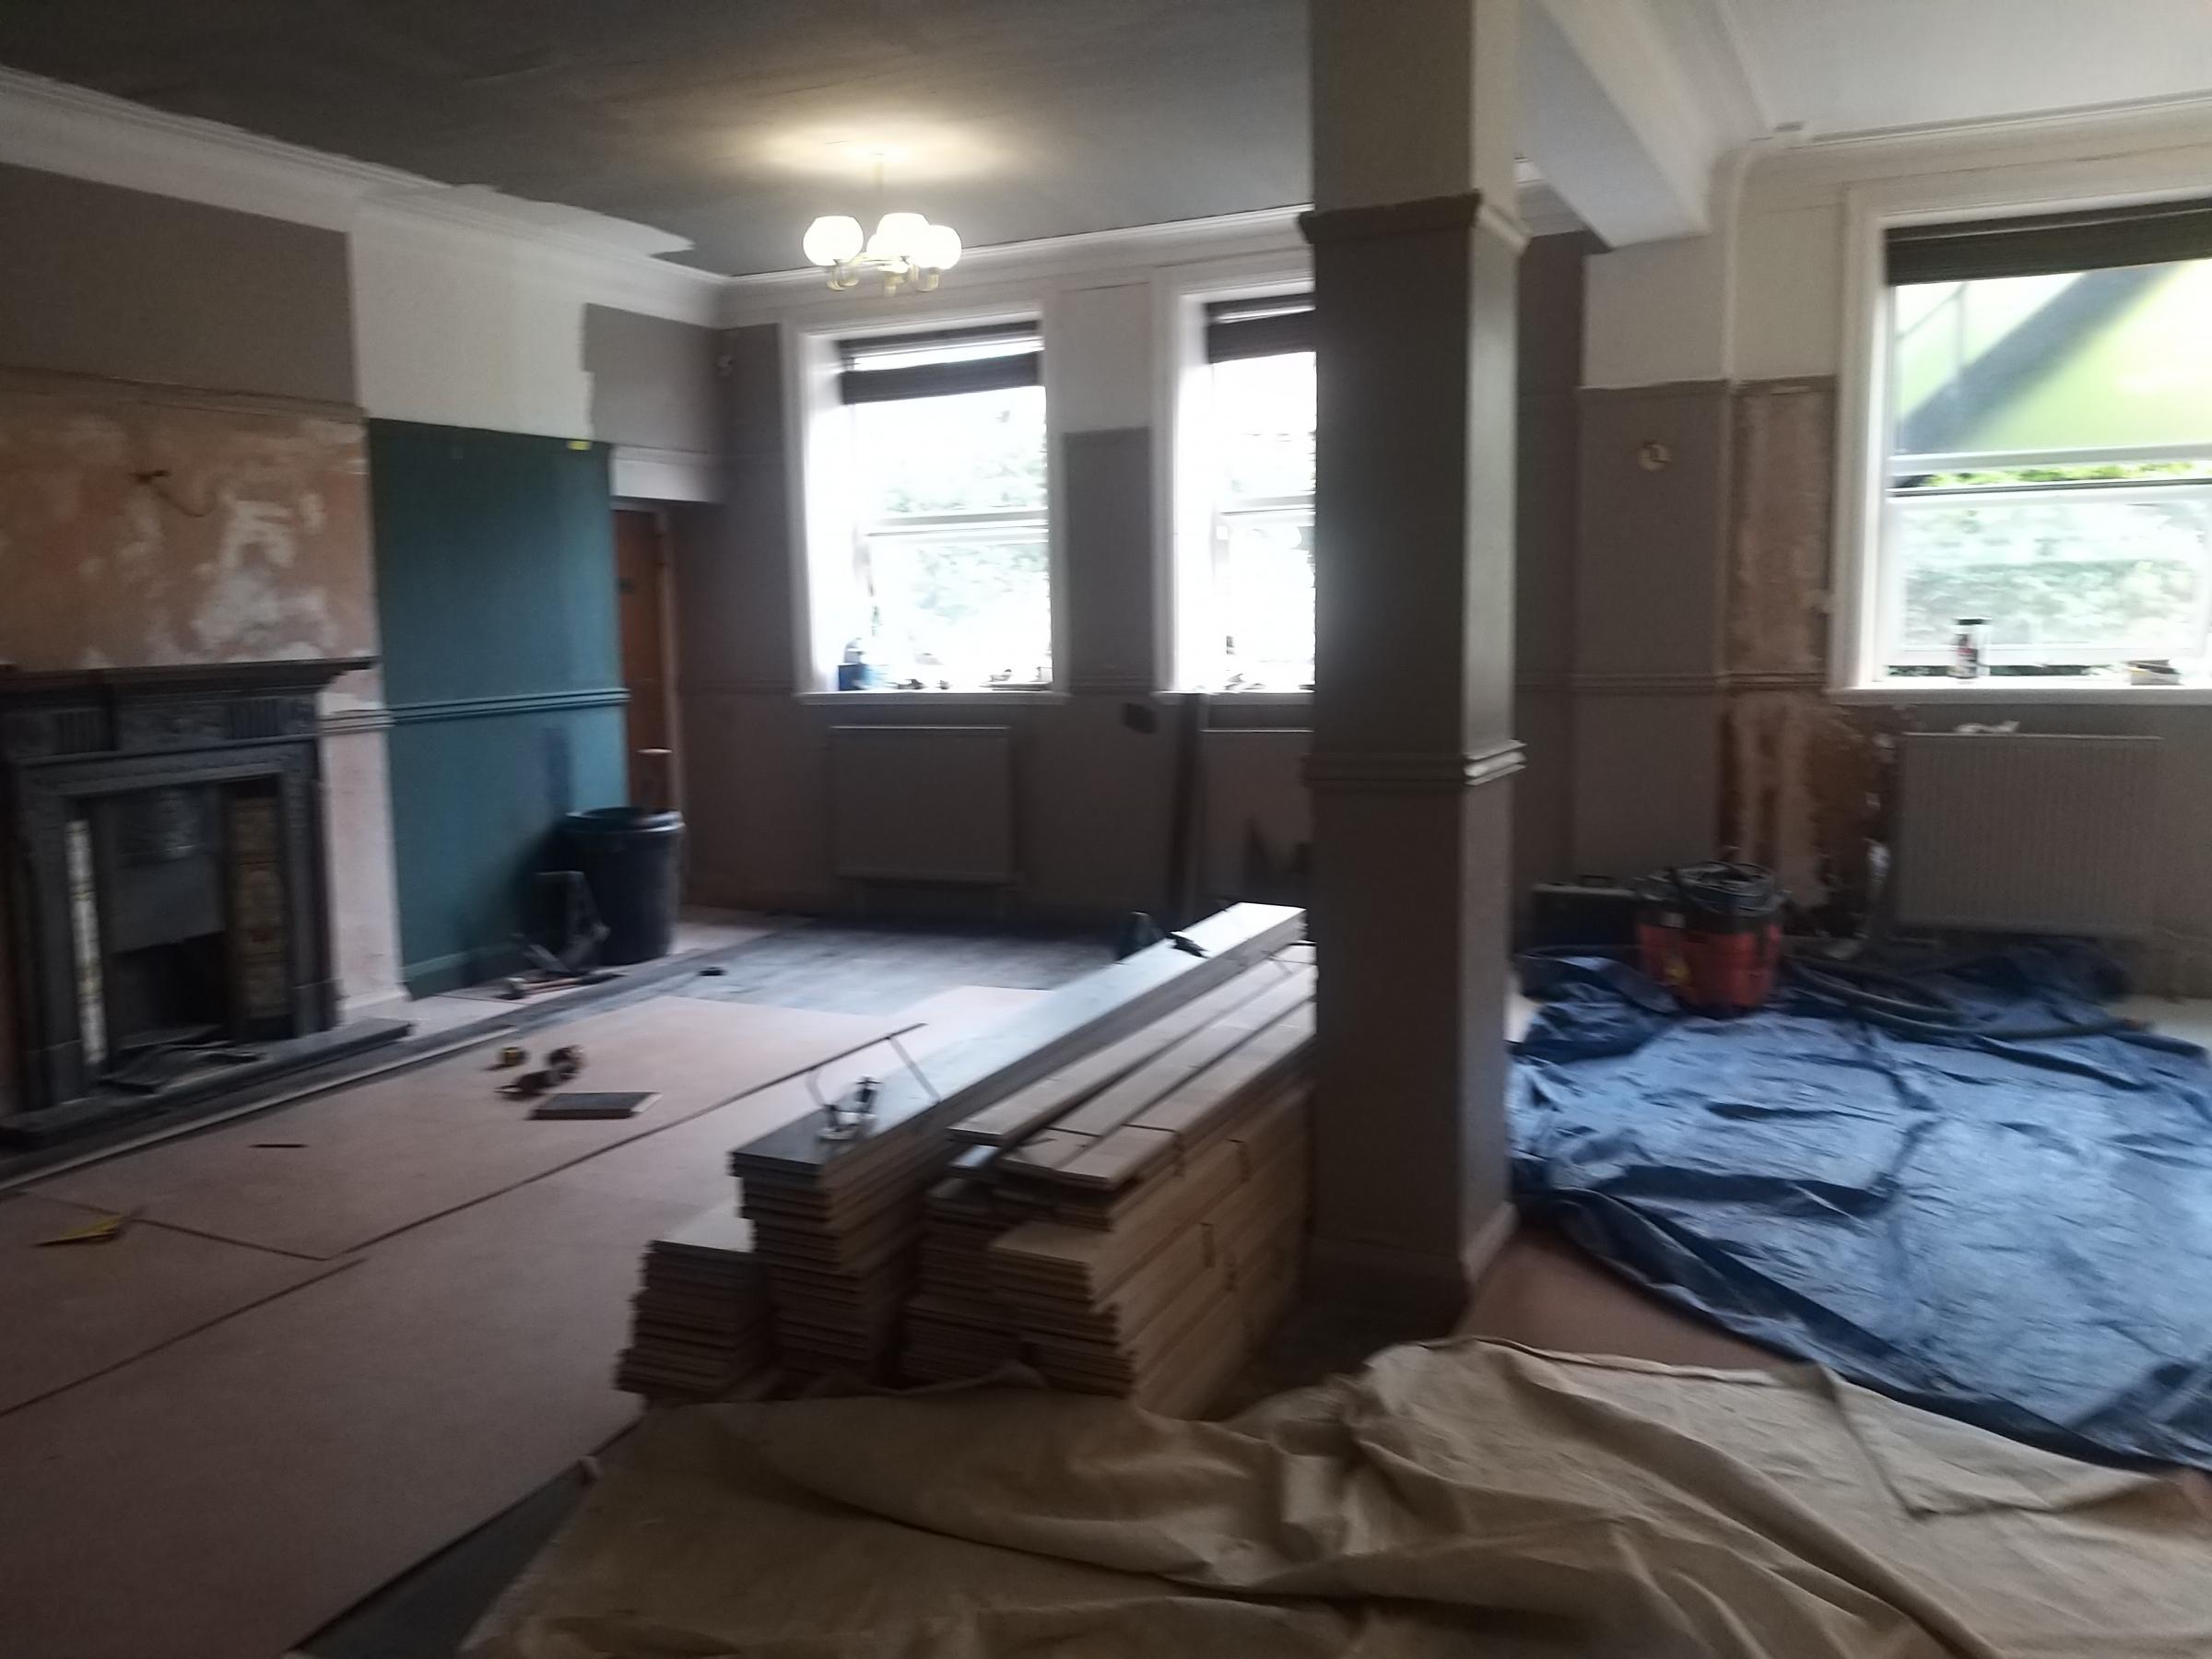 Work is ongoing at The Pied Bull